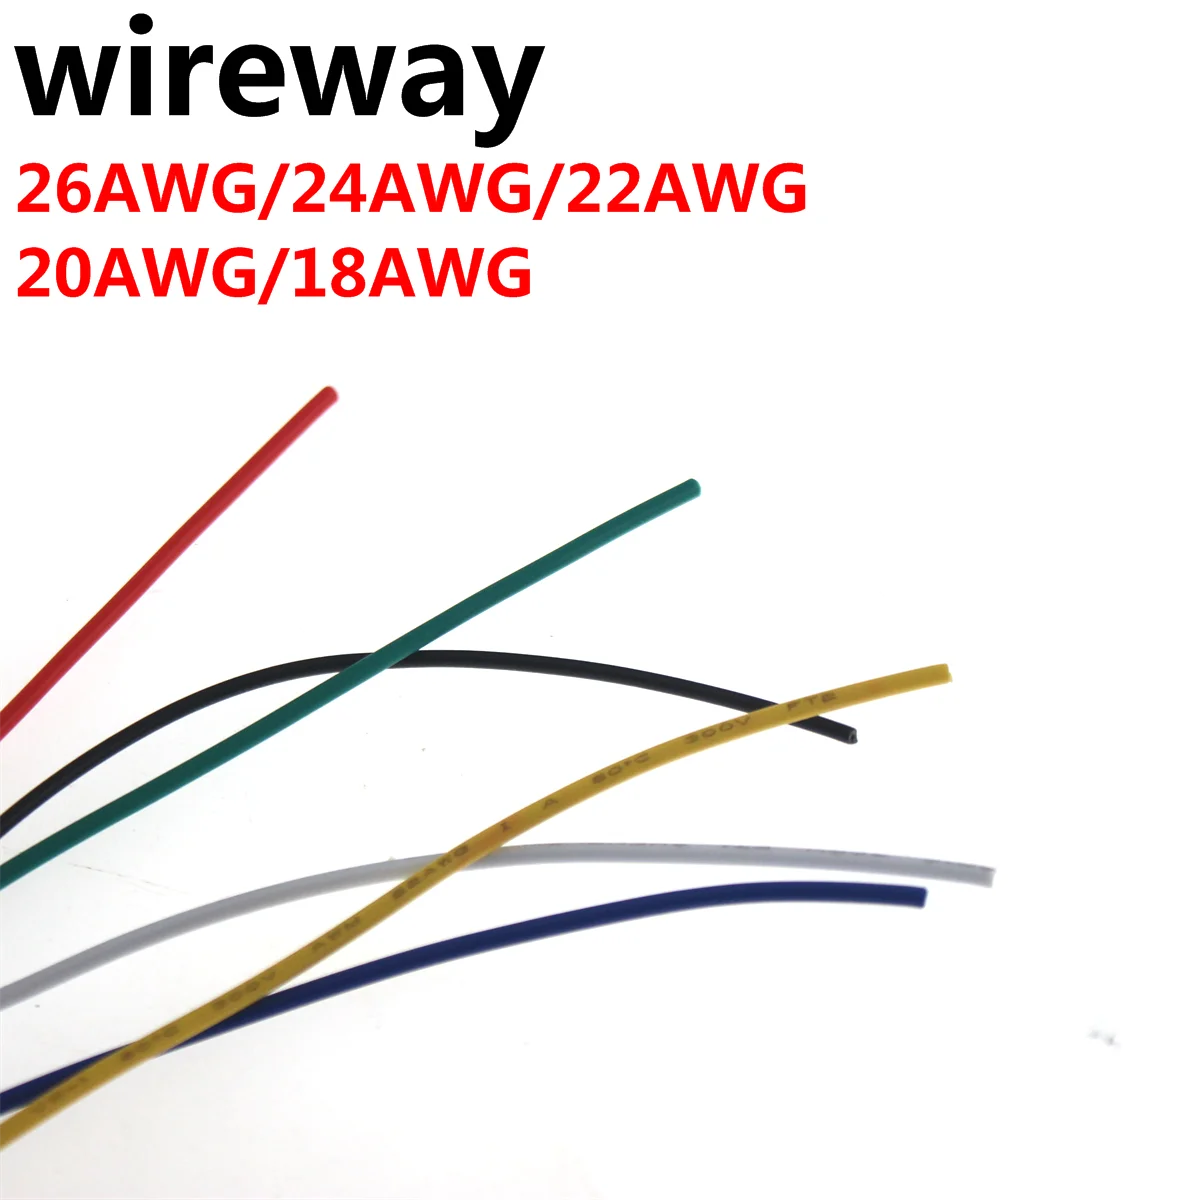 10M Electronic Wire Tinned Copper Cable PVC Insulated 18AWG 20AWG 22AWG 24AWG 26AWG White/Black UL1007